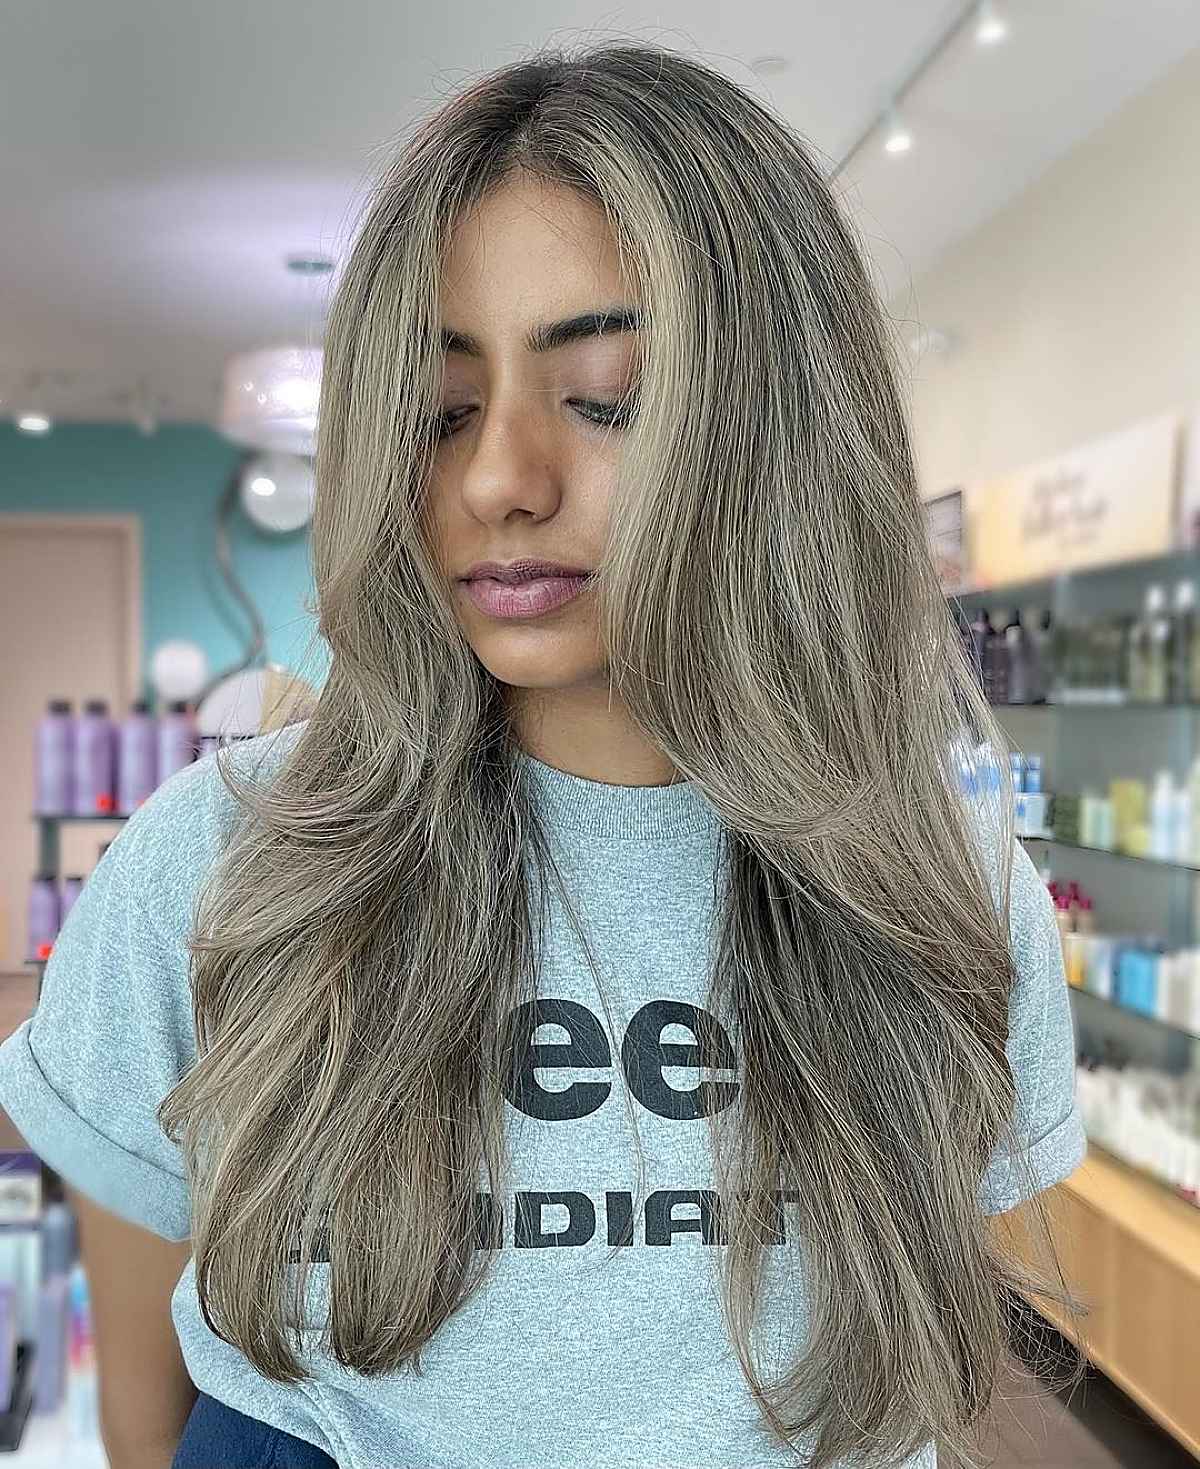 21 Perfect Dirty Blonde Hair Color Ideas (2021 Looks)